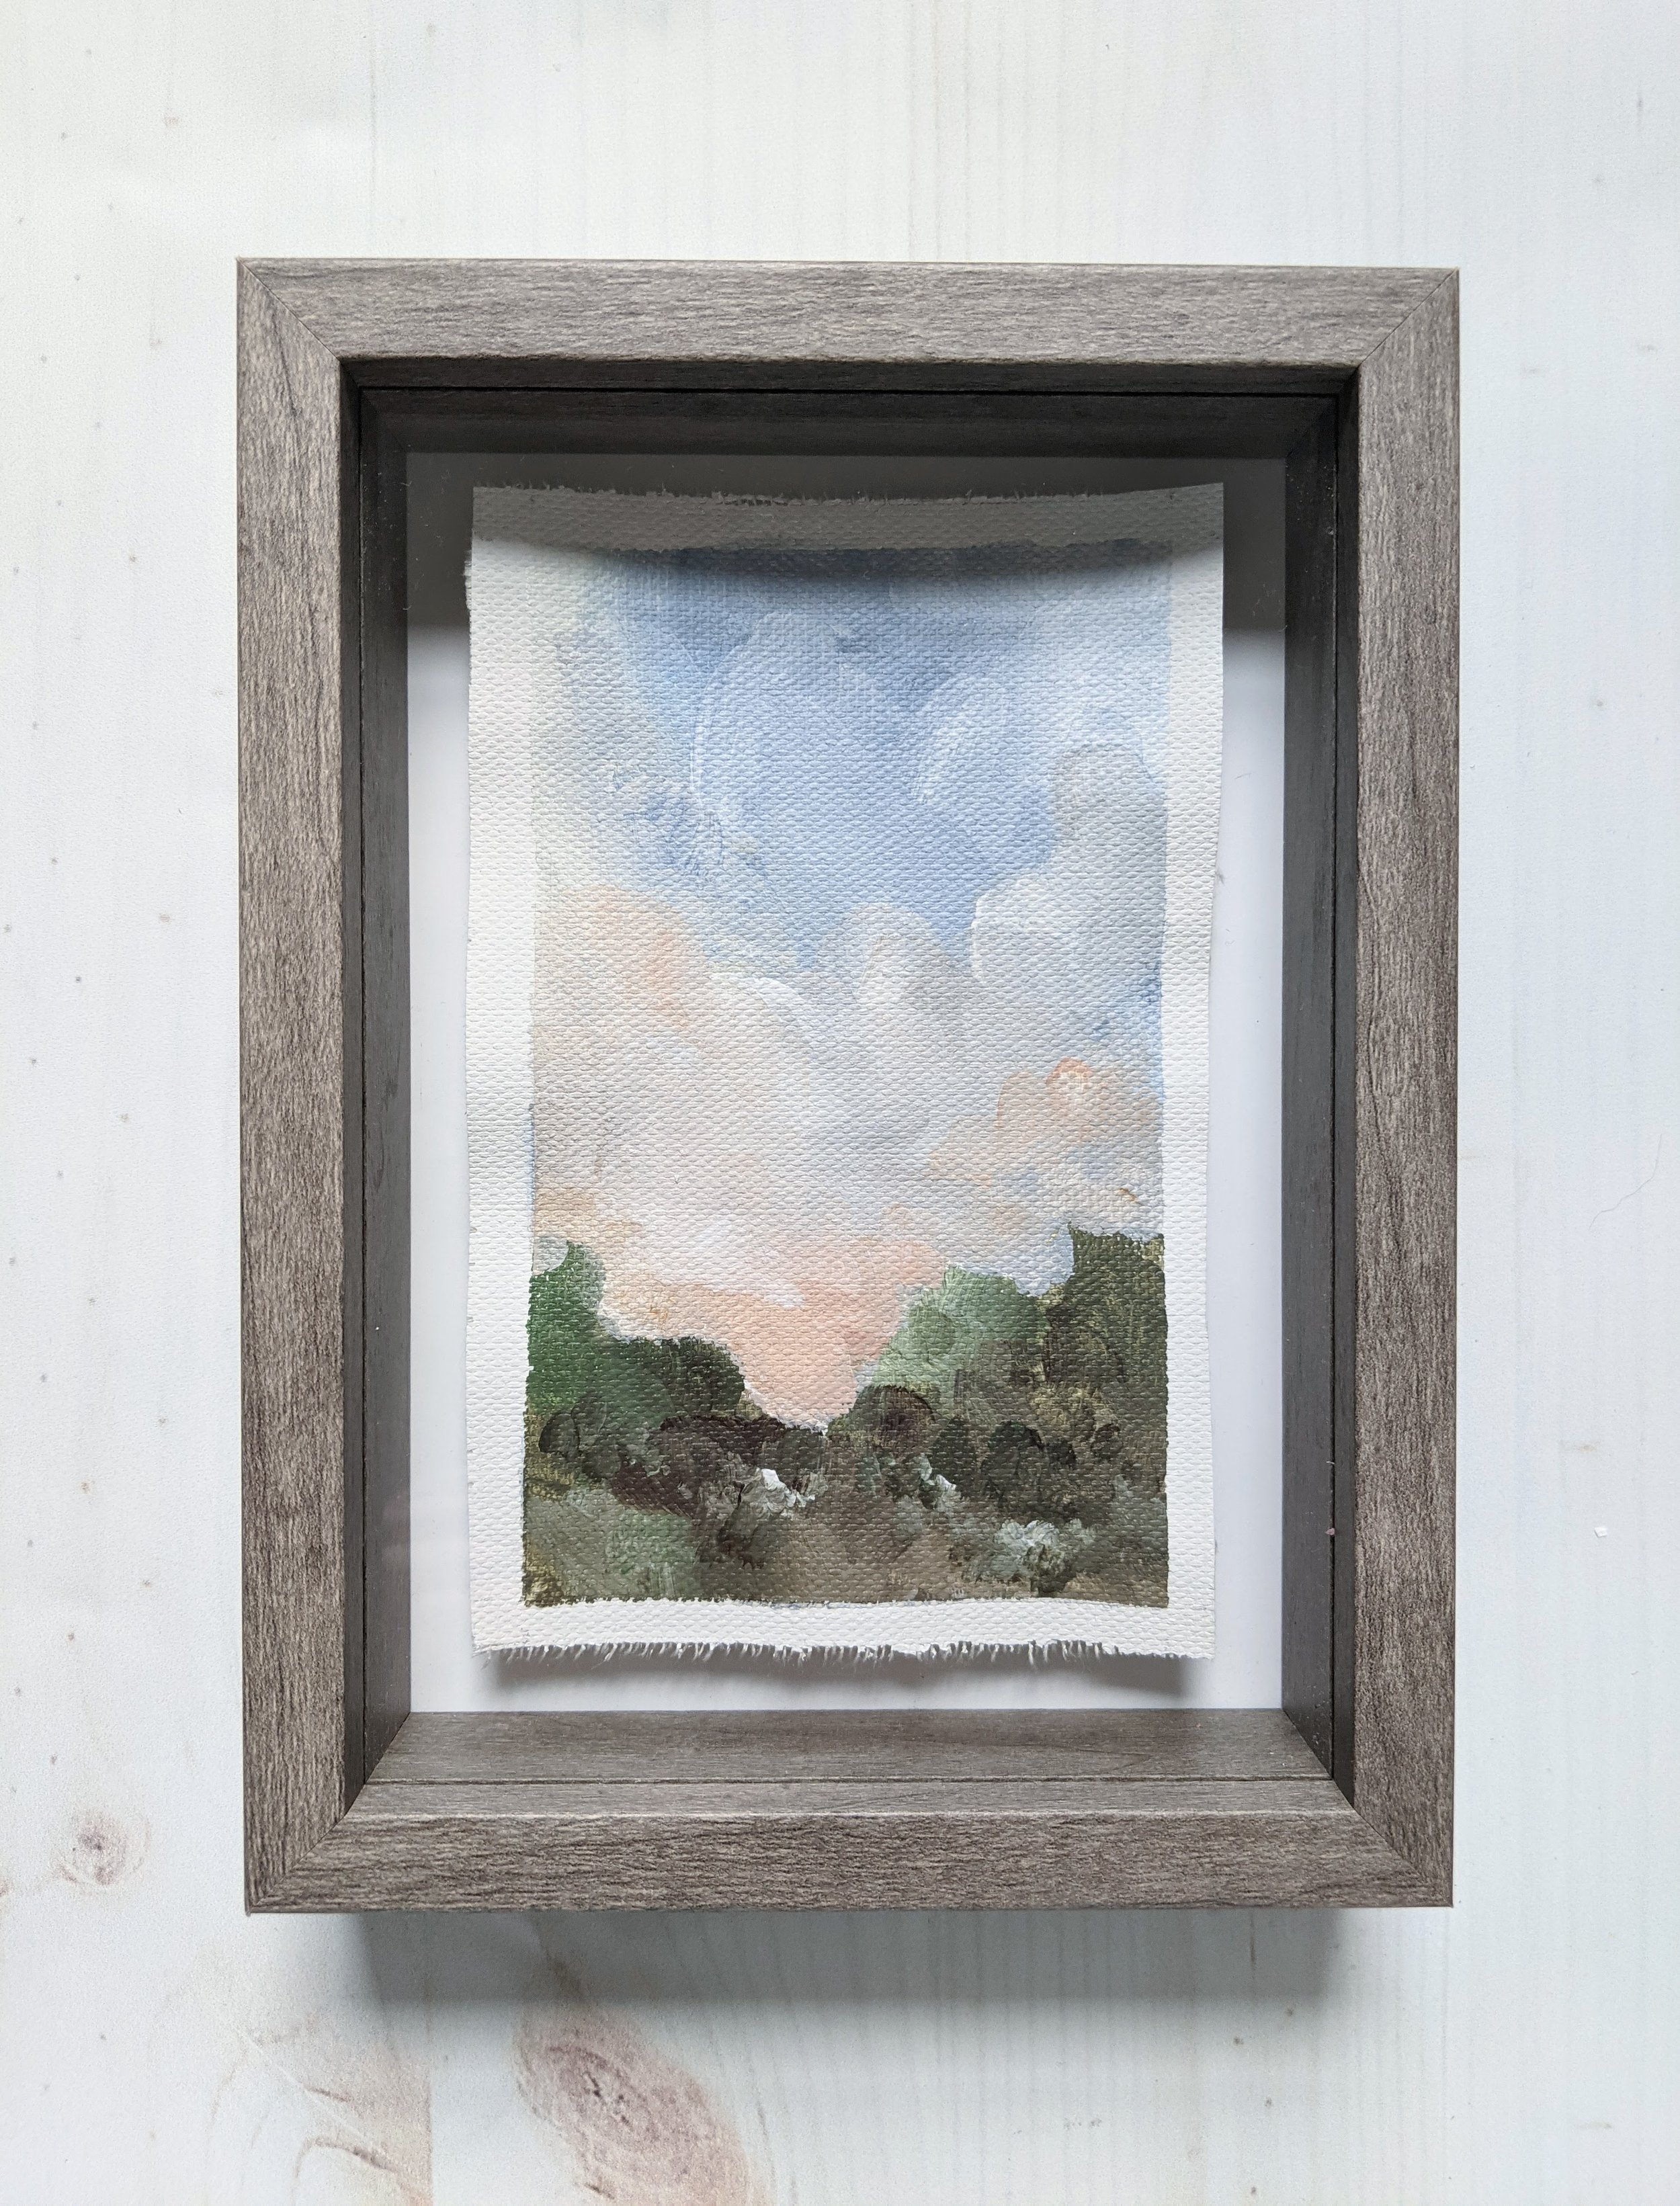 11x14 Picture Frames  Priced for Starving Artists